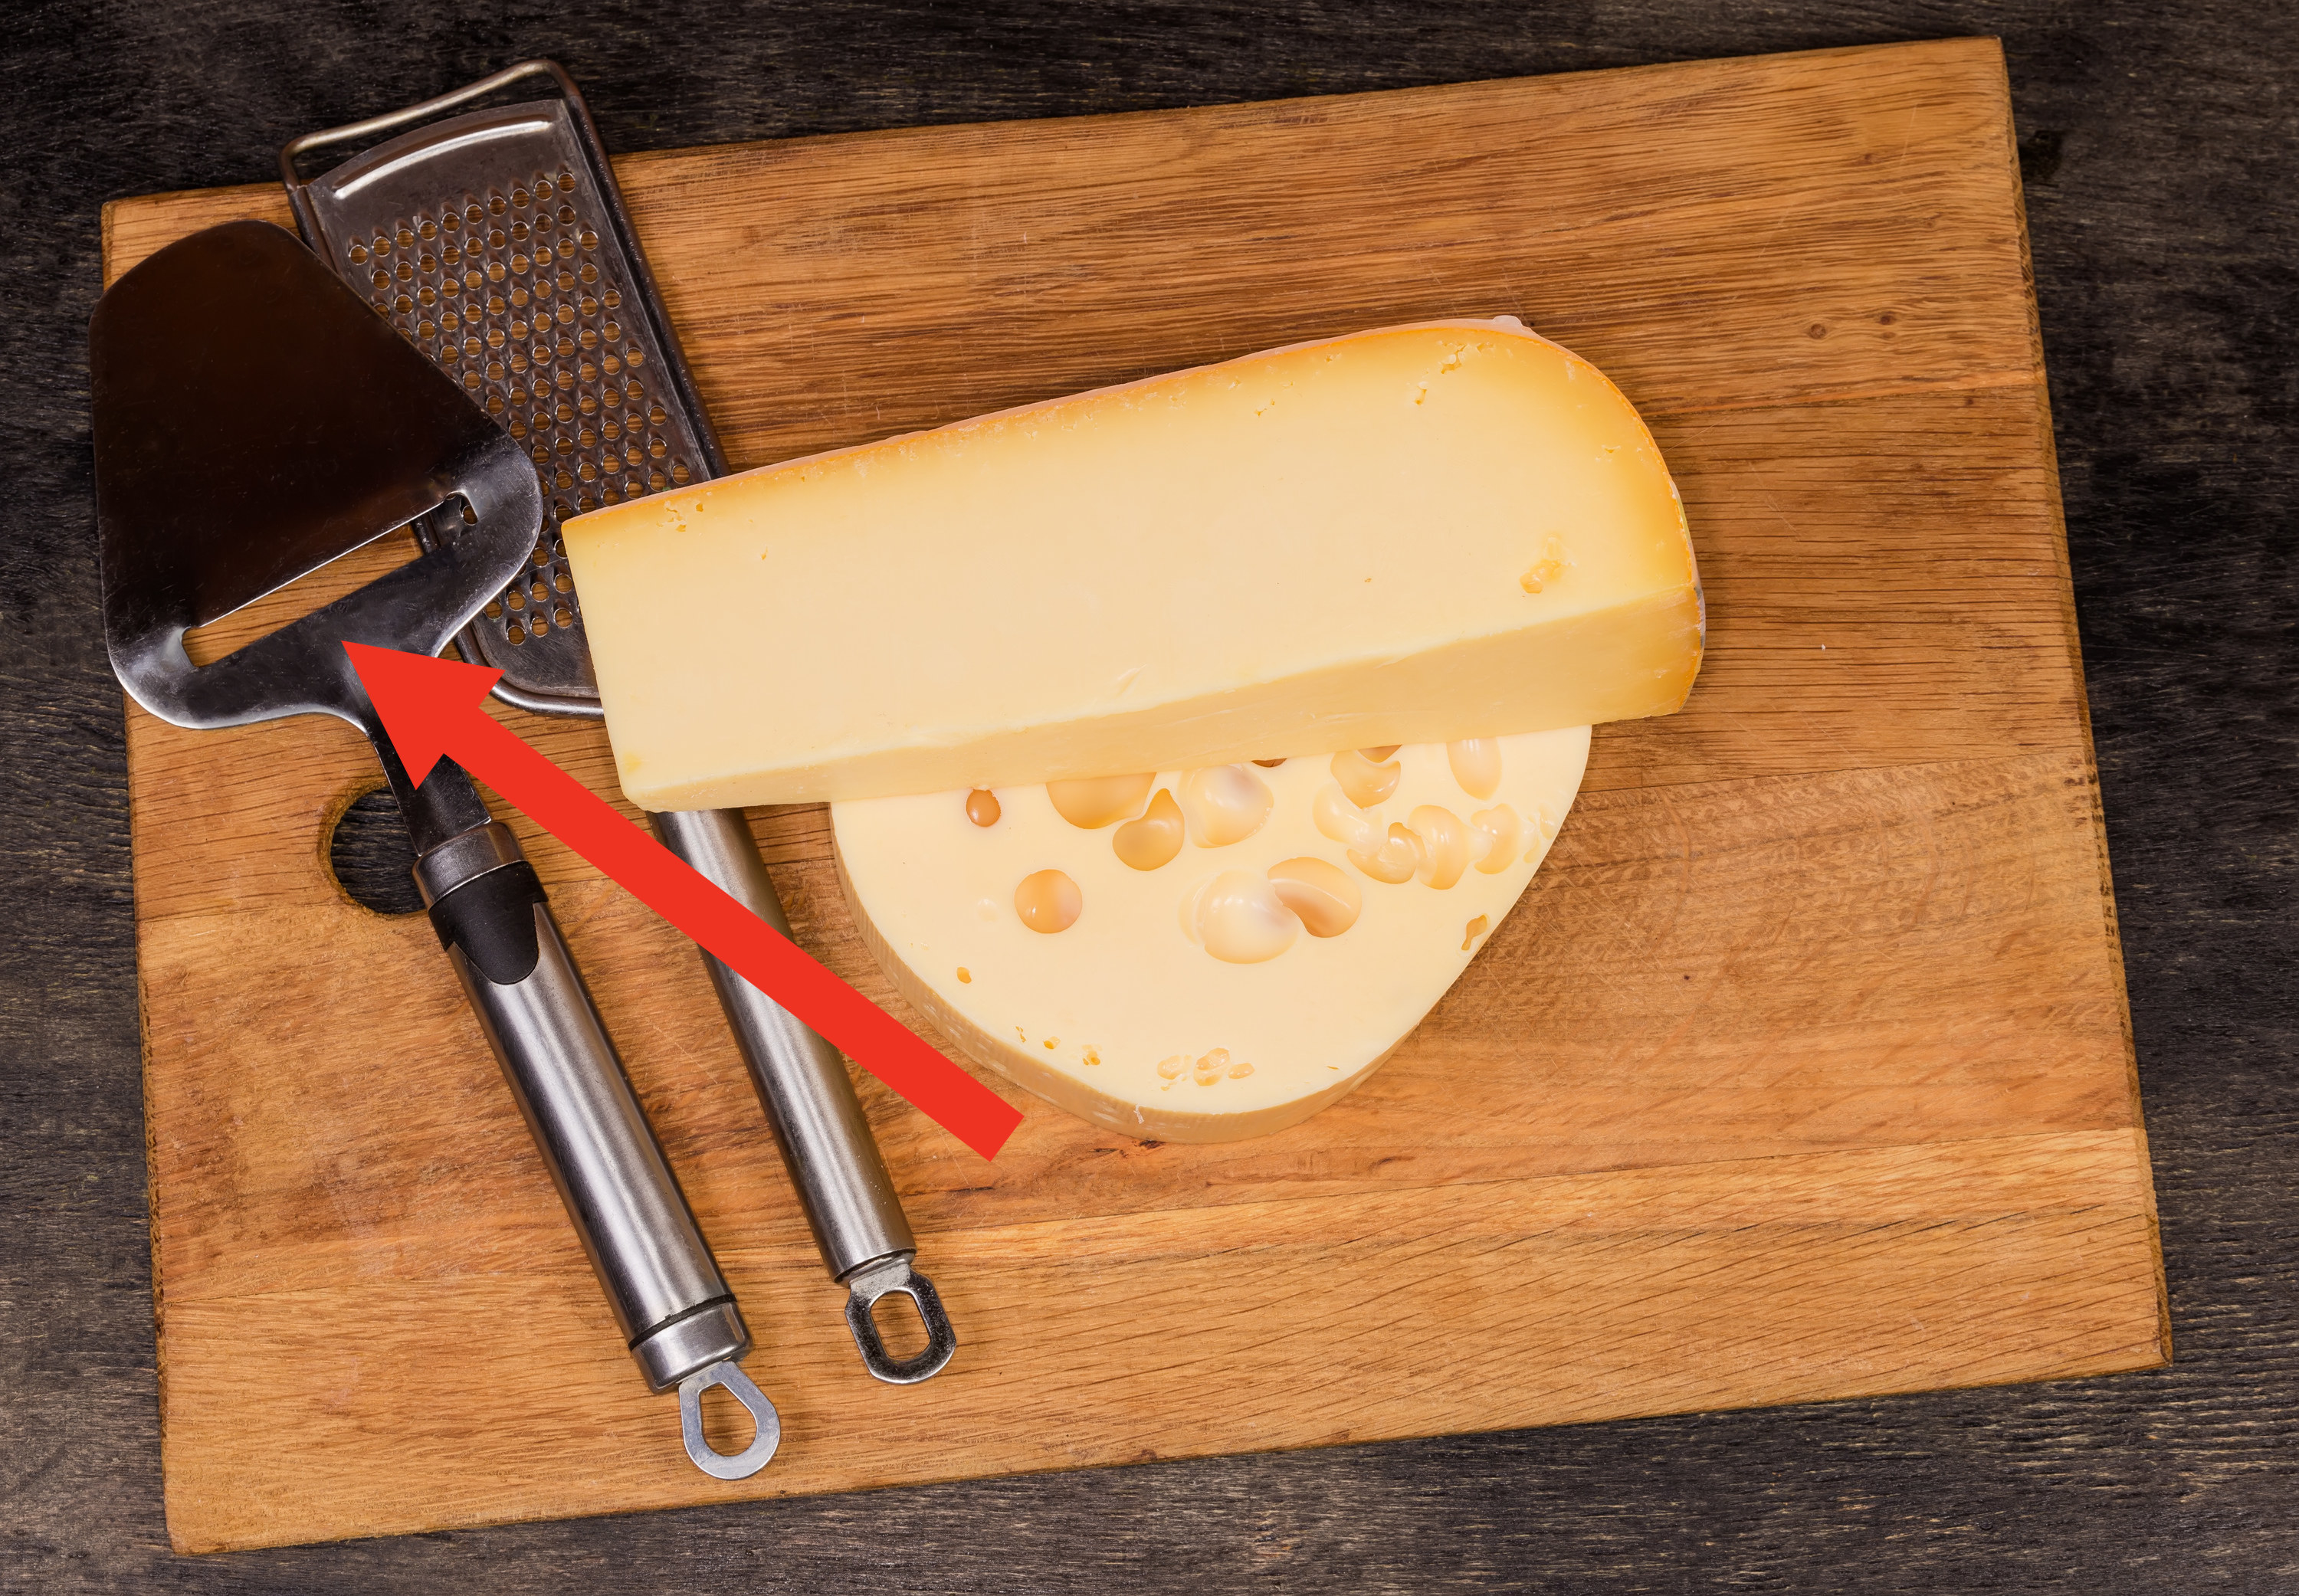 Cheese slicer and grater on a cutting board with two types of hard cheese